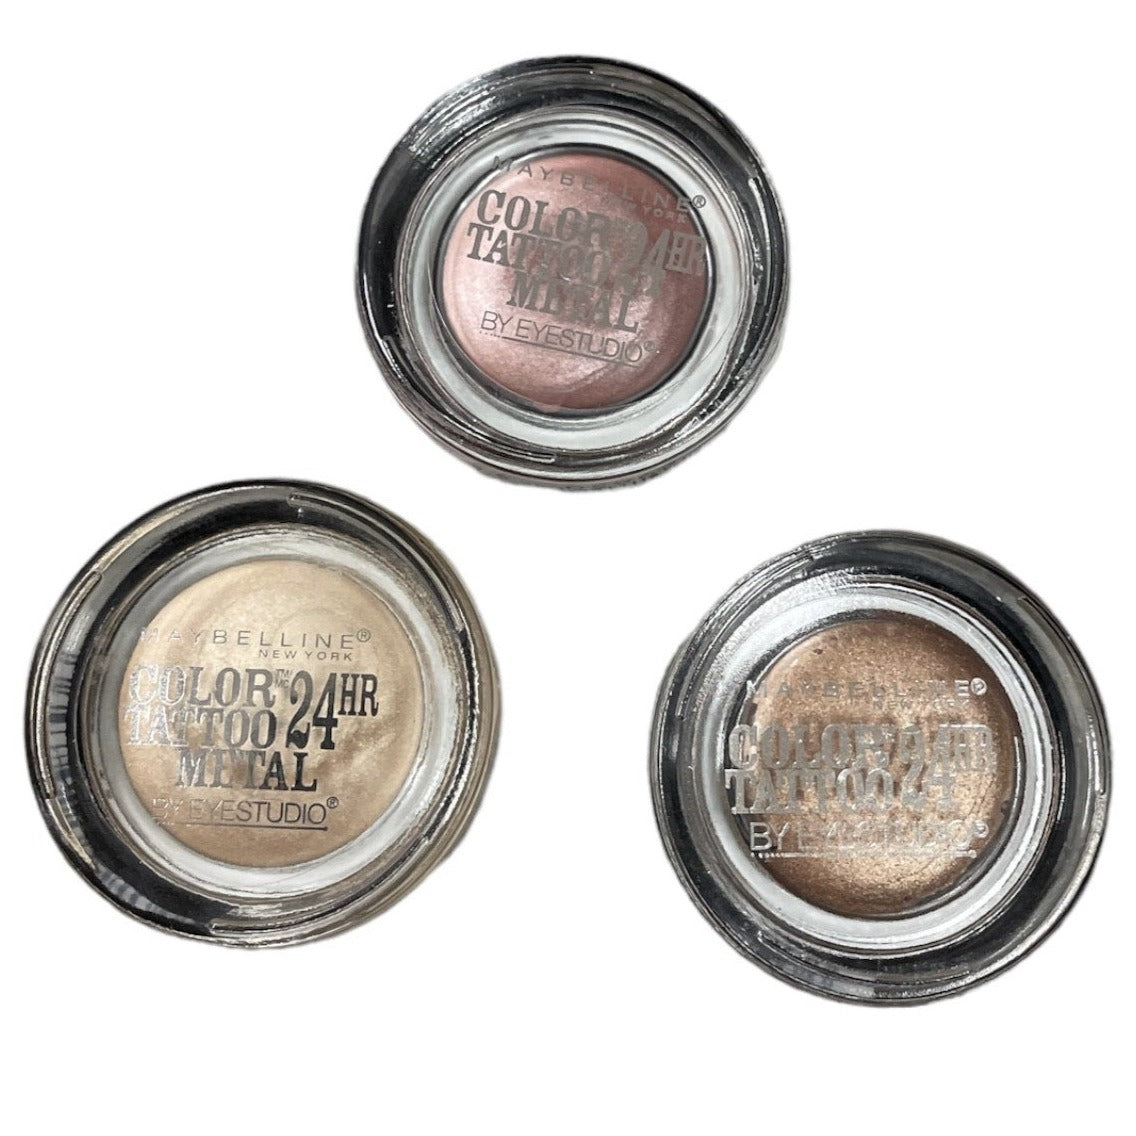 Shelf Pull Makeup - Maybelline Color Tattoo Eyeshadow Bad To The Bronze, Inked In Pink & Barely Branded - 36 Units cosmetics liquidations wholesale overstock